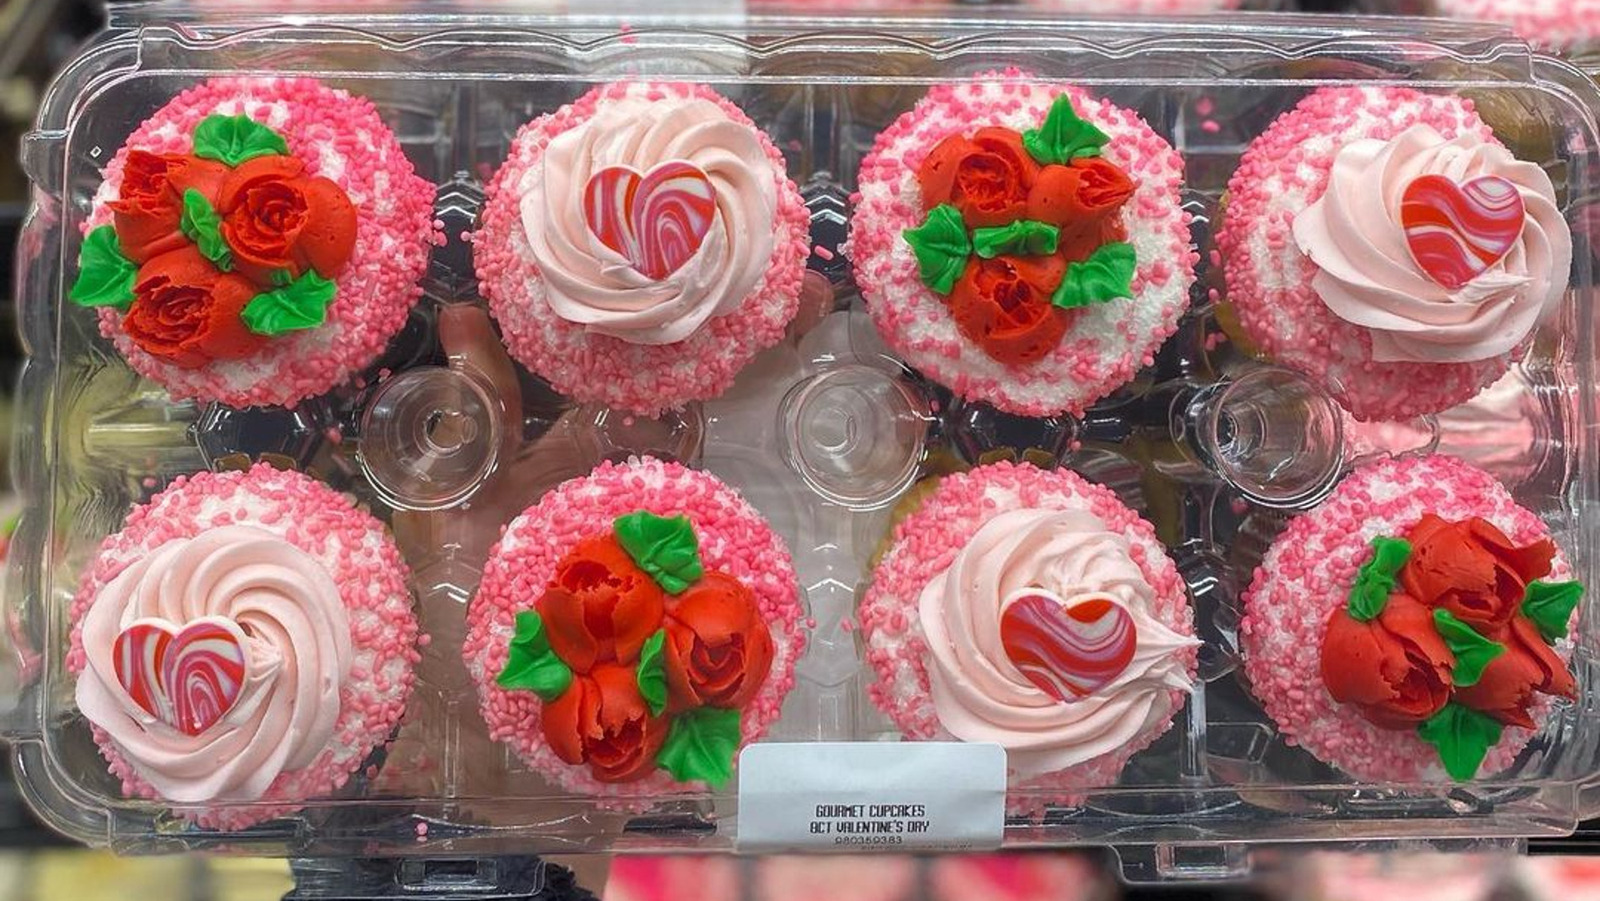 Instagram Has Mixed Feelings About Sam's Club's Valentine Cupcakes